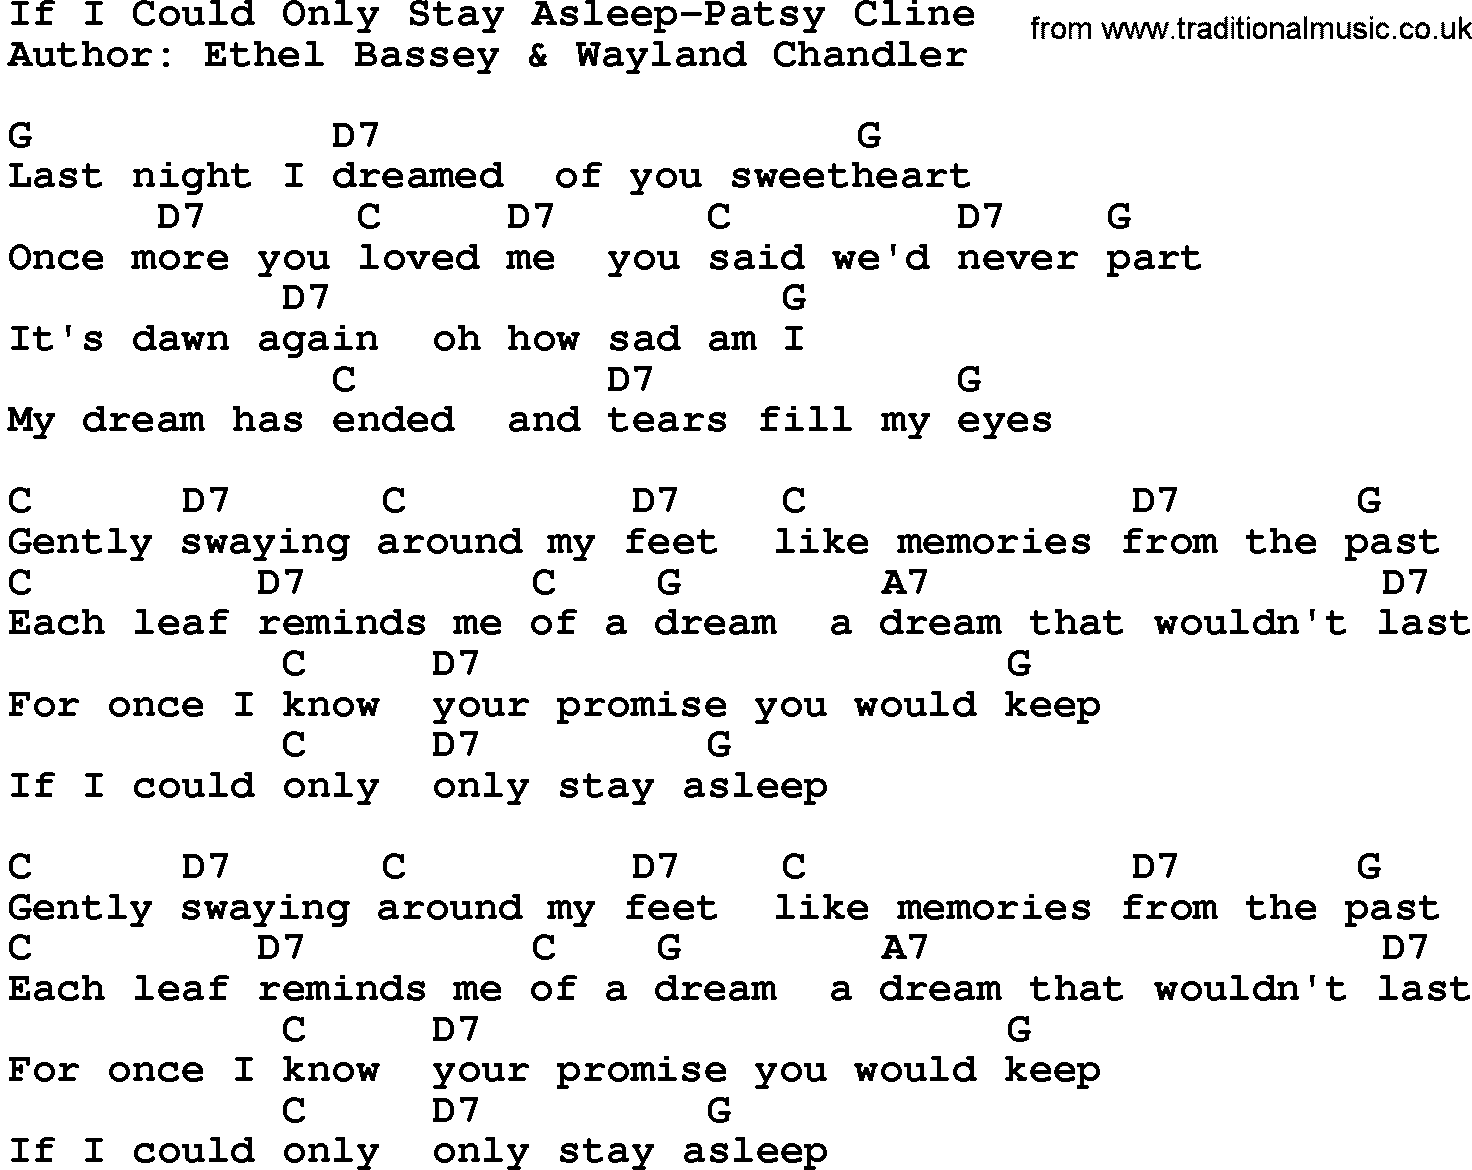 Country music song: If I Could Only Stay Asleep-Patsy Cline lyrics and chords